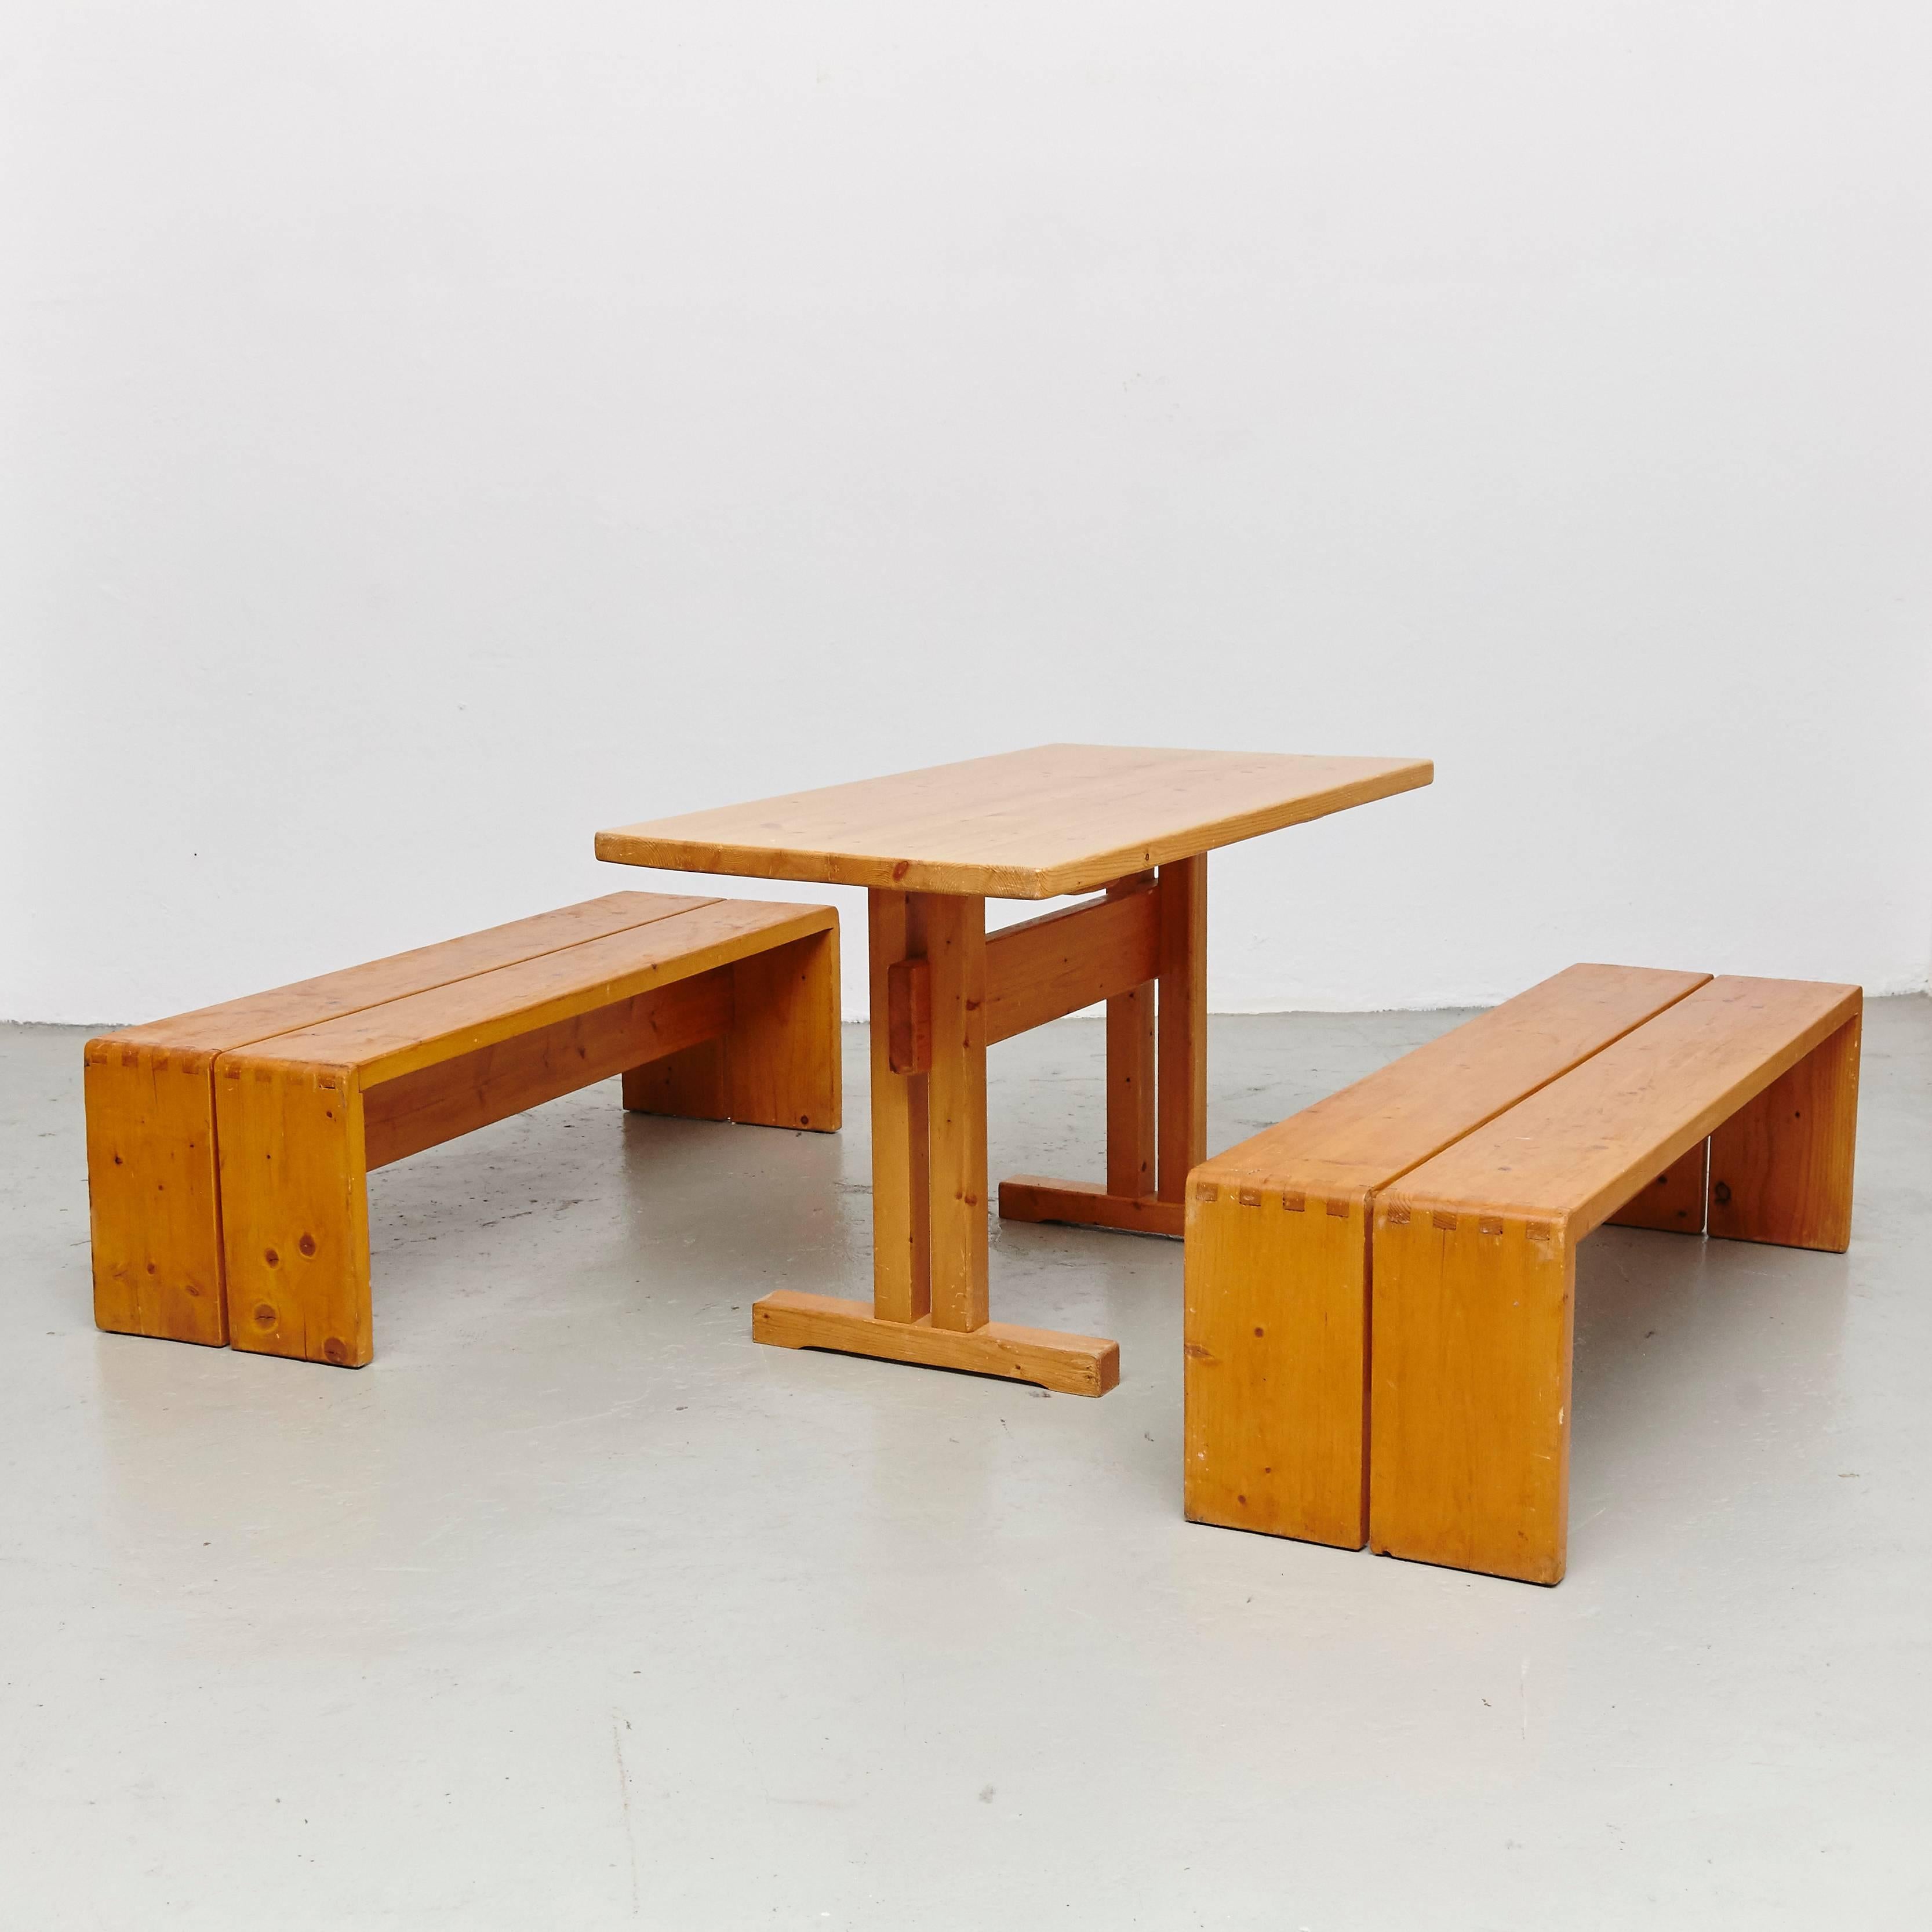 Set of table and benches designed by Charlotte Perriand for Les Arcs ski Resort circa 1960, manufactured in France.

Pinewood.

In good original condition, with minor wear consistent with age and use, preserving a beautiful patina.

Charlotte